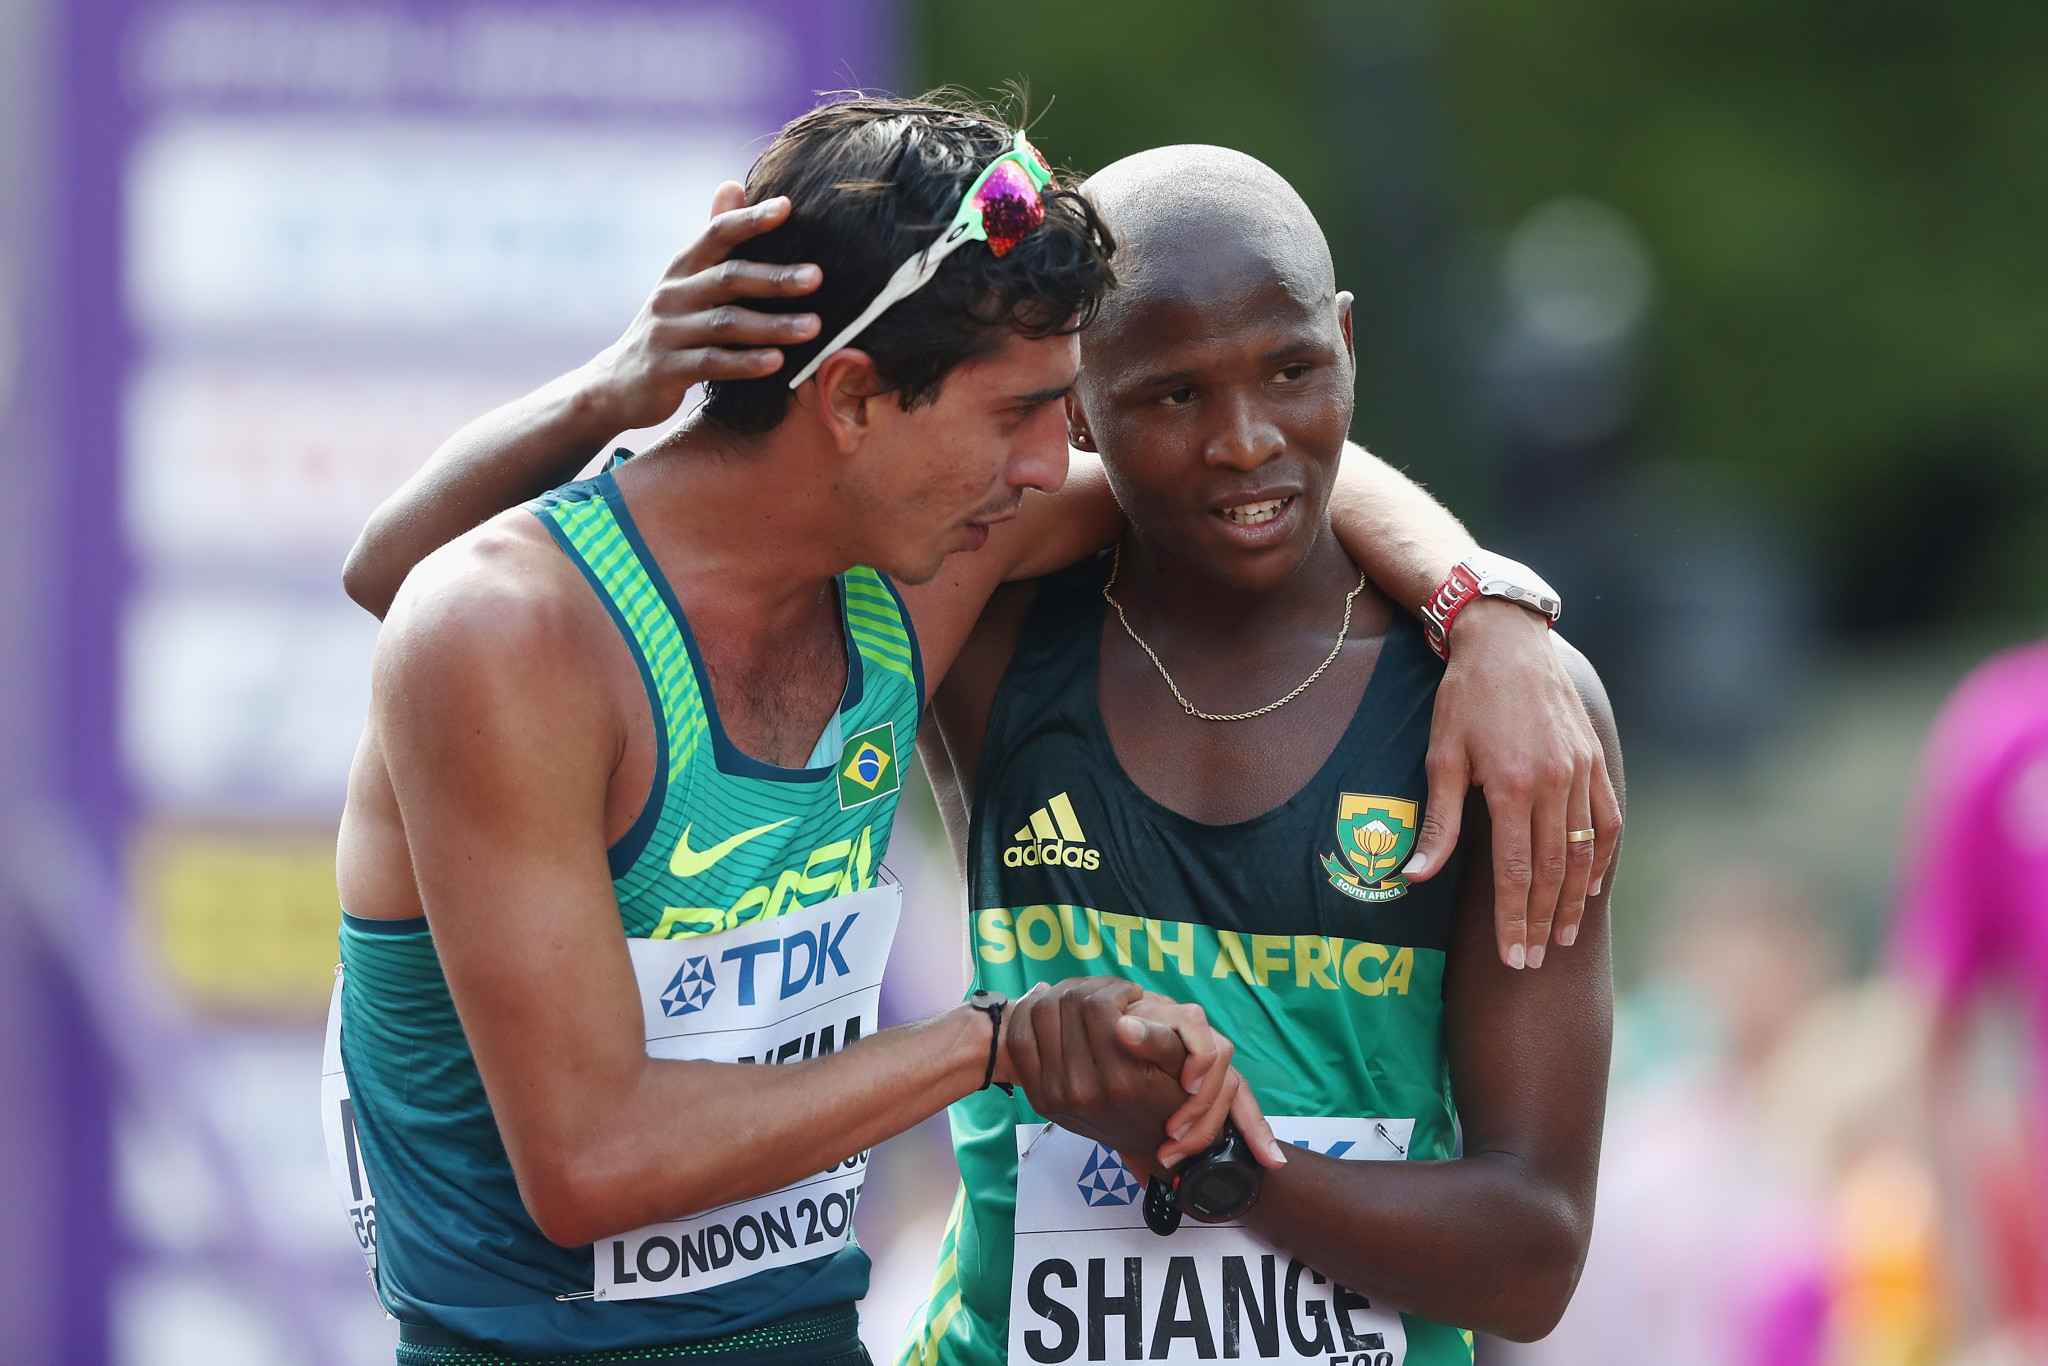 Lebogang Shange of South Africa, right, finished fourth in the men's 20km race walk at the 2017 World Athletics Championships ©Getty Images